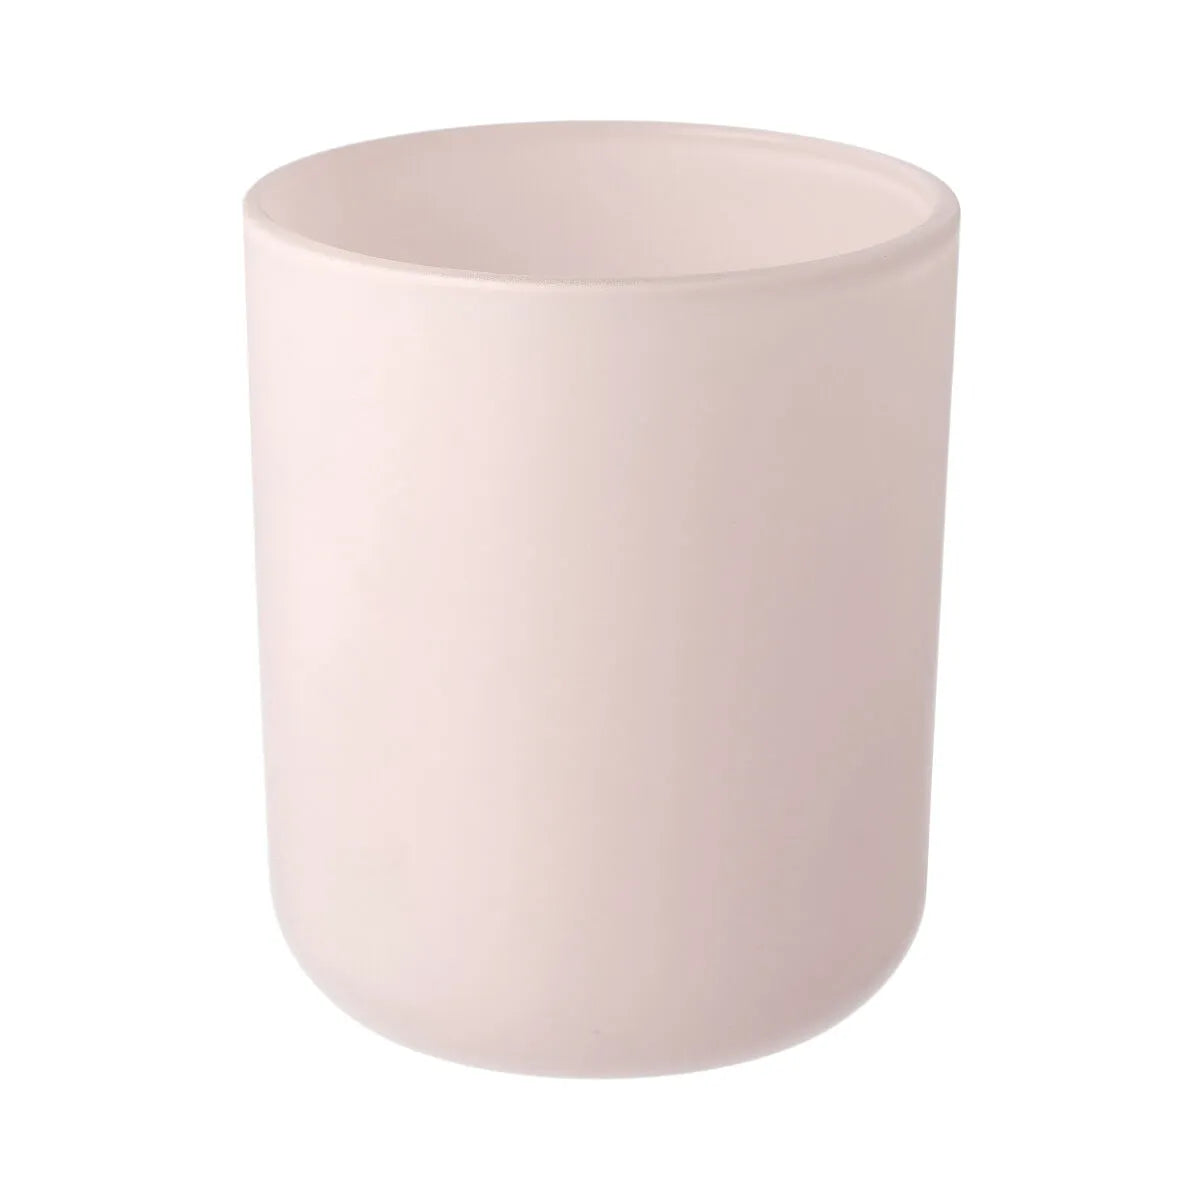 Very Vanilla Large Soy Candle